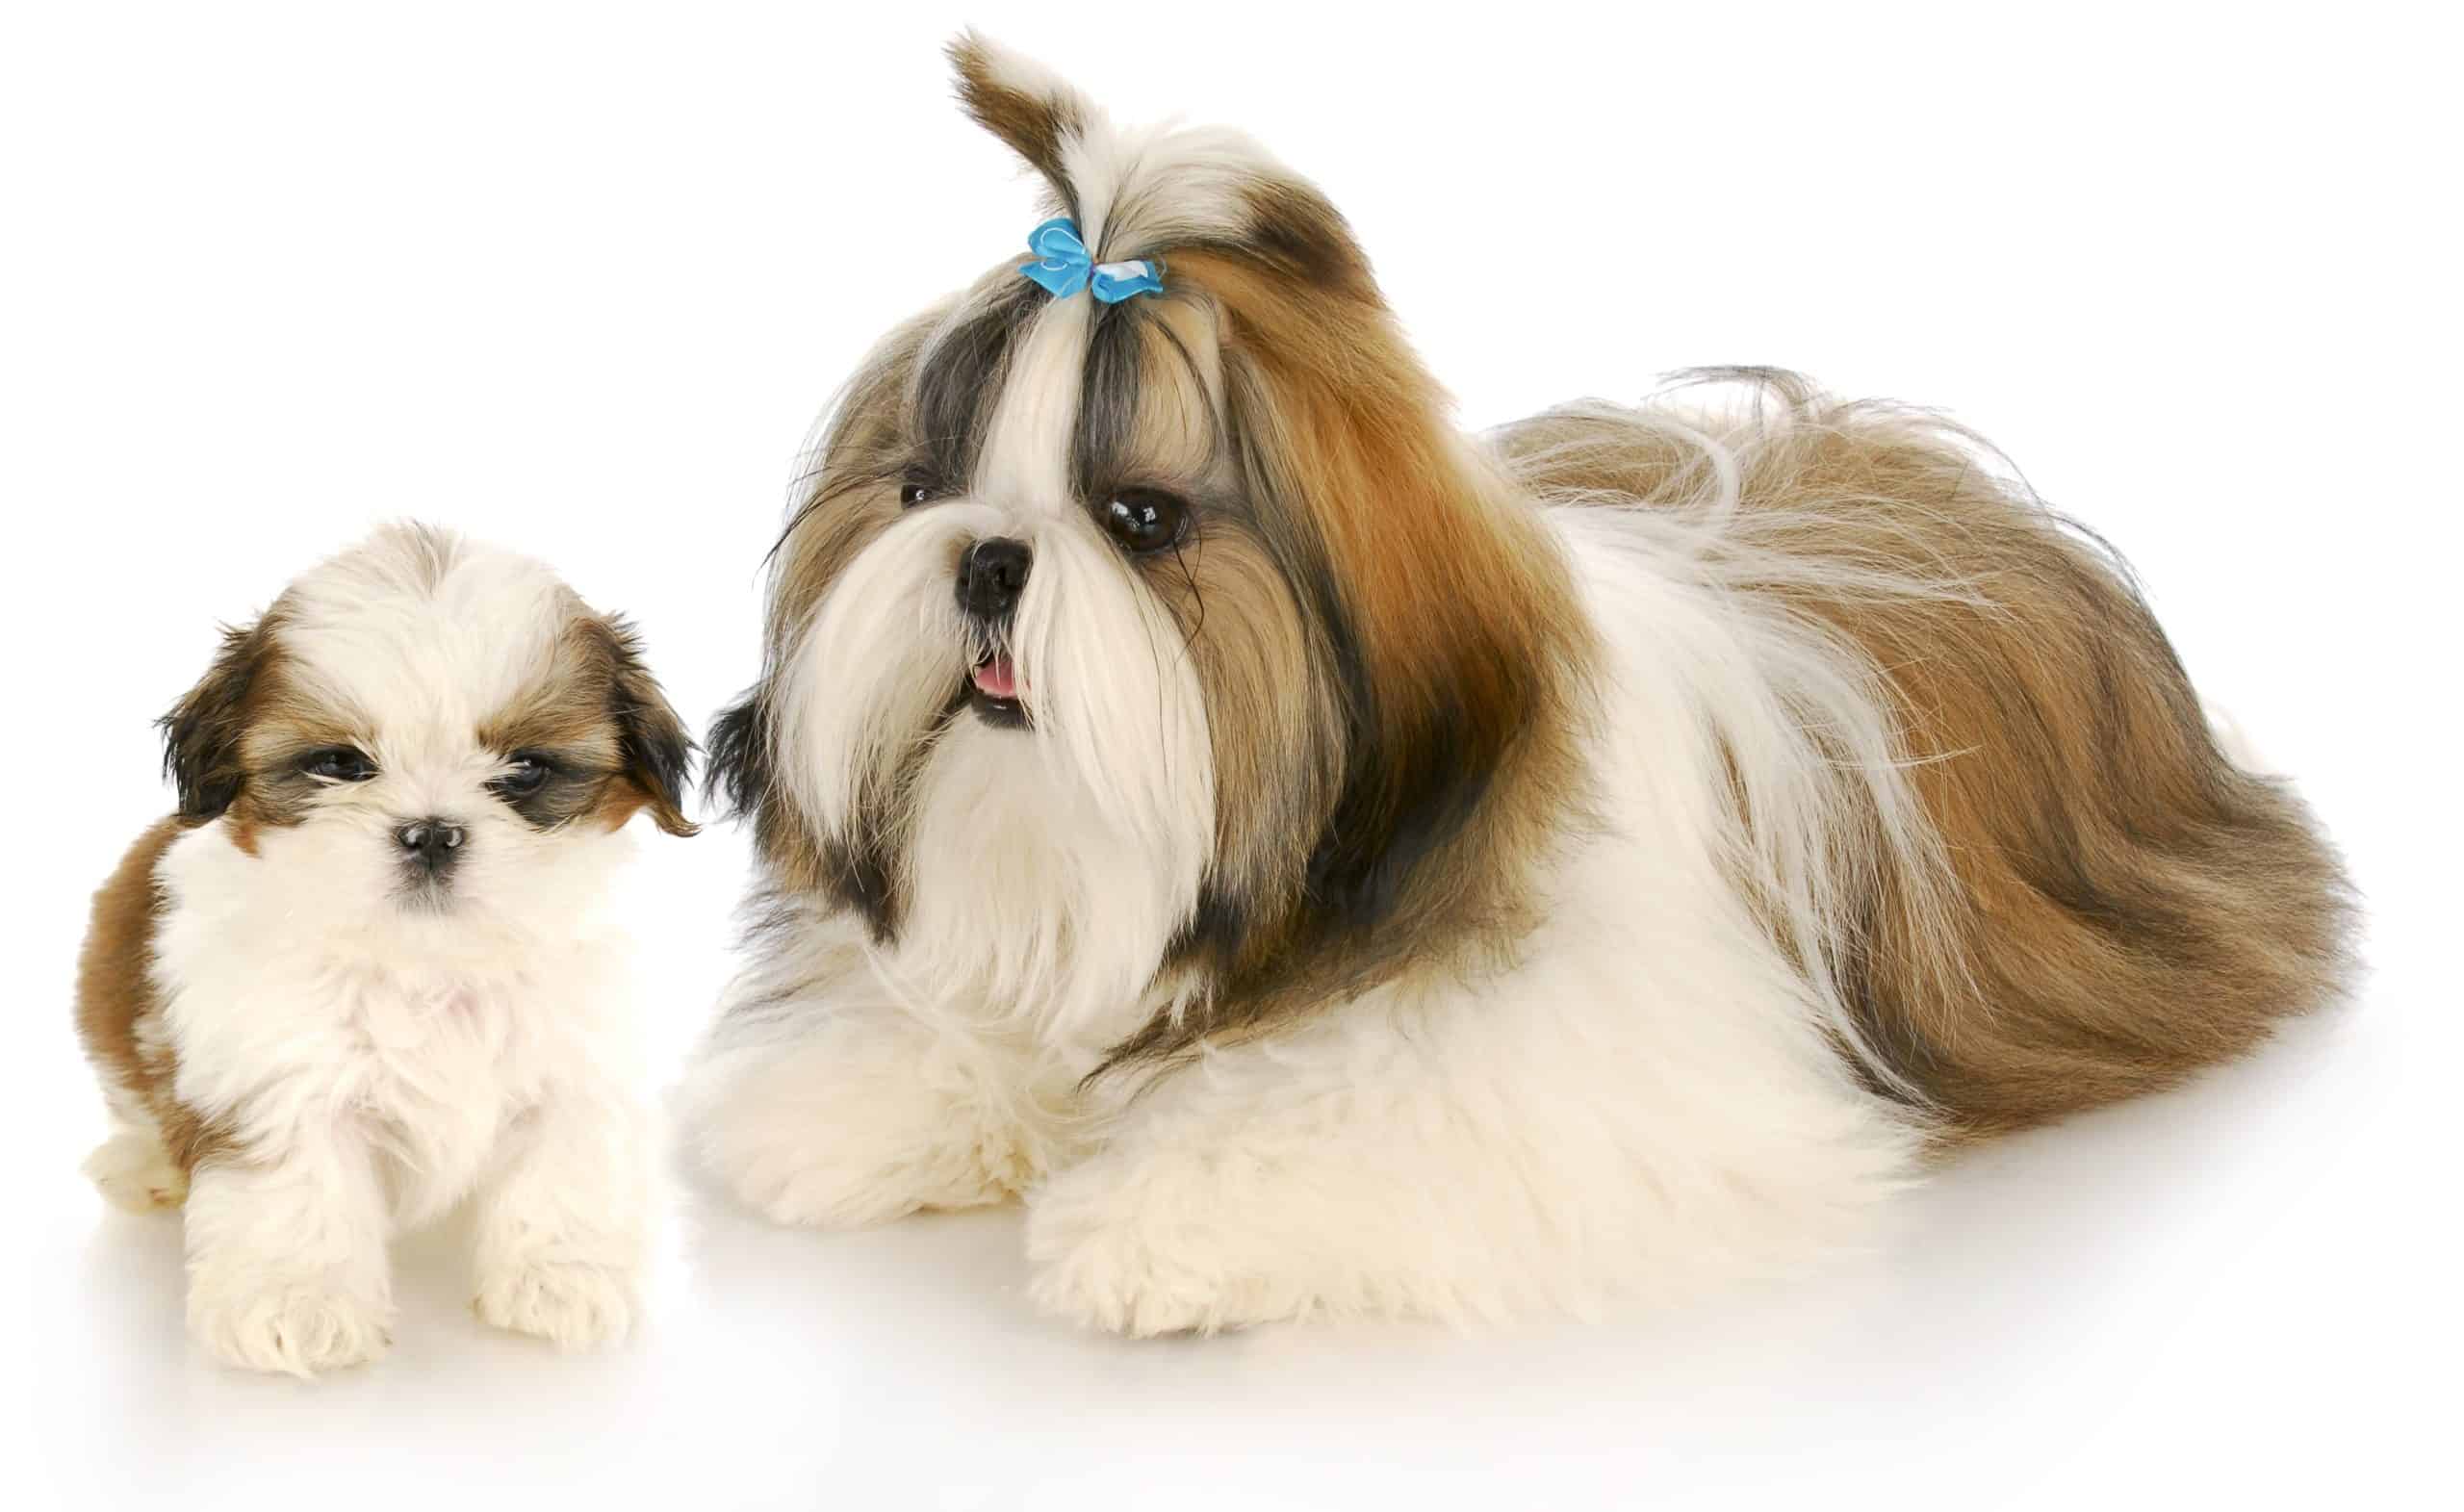 Shih Tzu mom with puppy. Shih Tzus don’t need a daily mile run to keep fit. A few runs in the house are enough. But they enjoy outdoor walks.